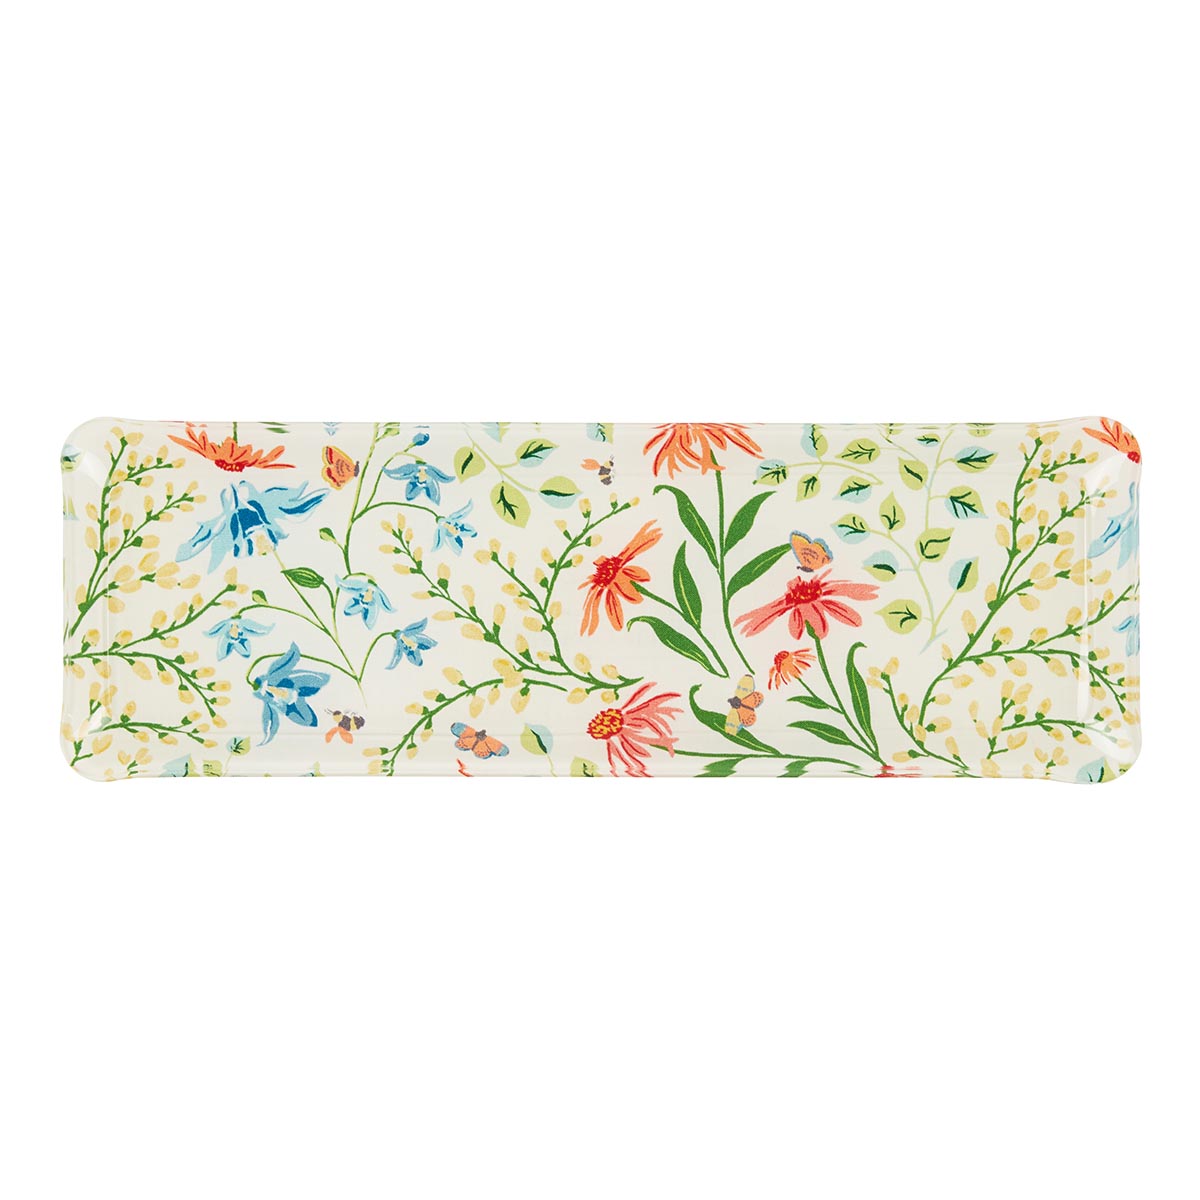 Fabric Tray Oblong 37X13 - Multi Floral